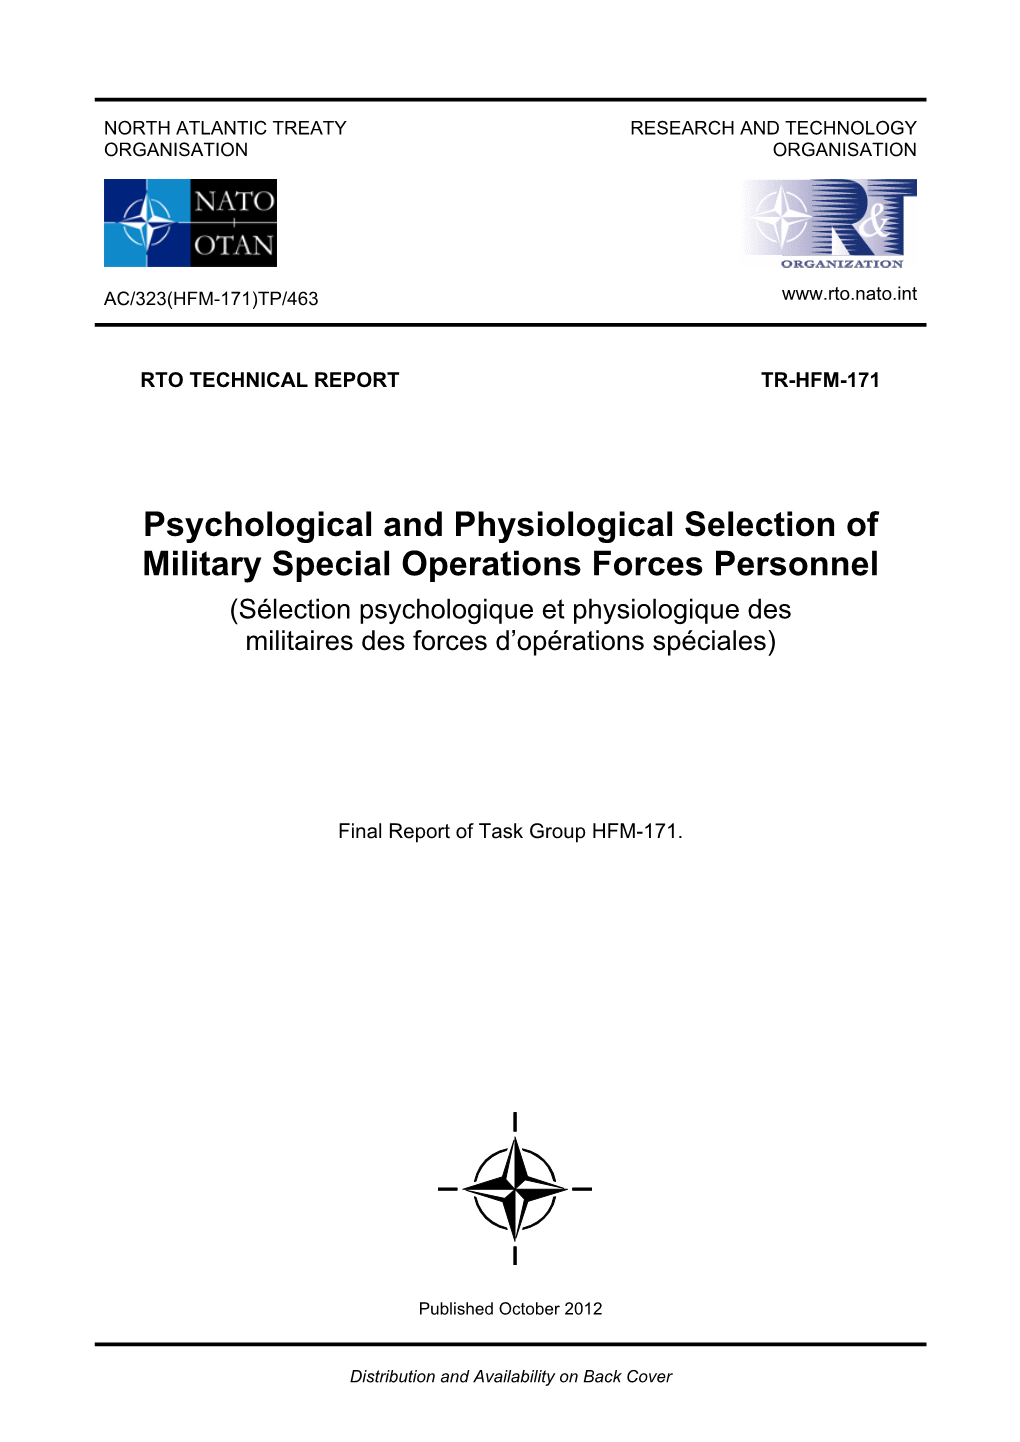 Psychological and Physiological Selection of Military